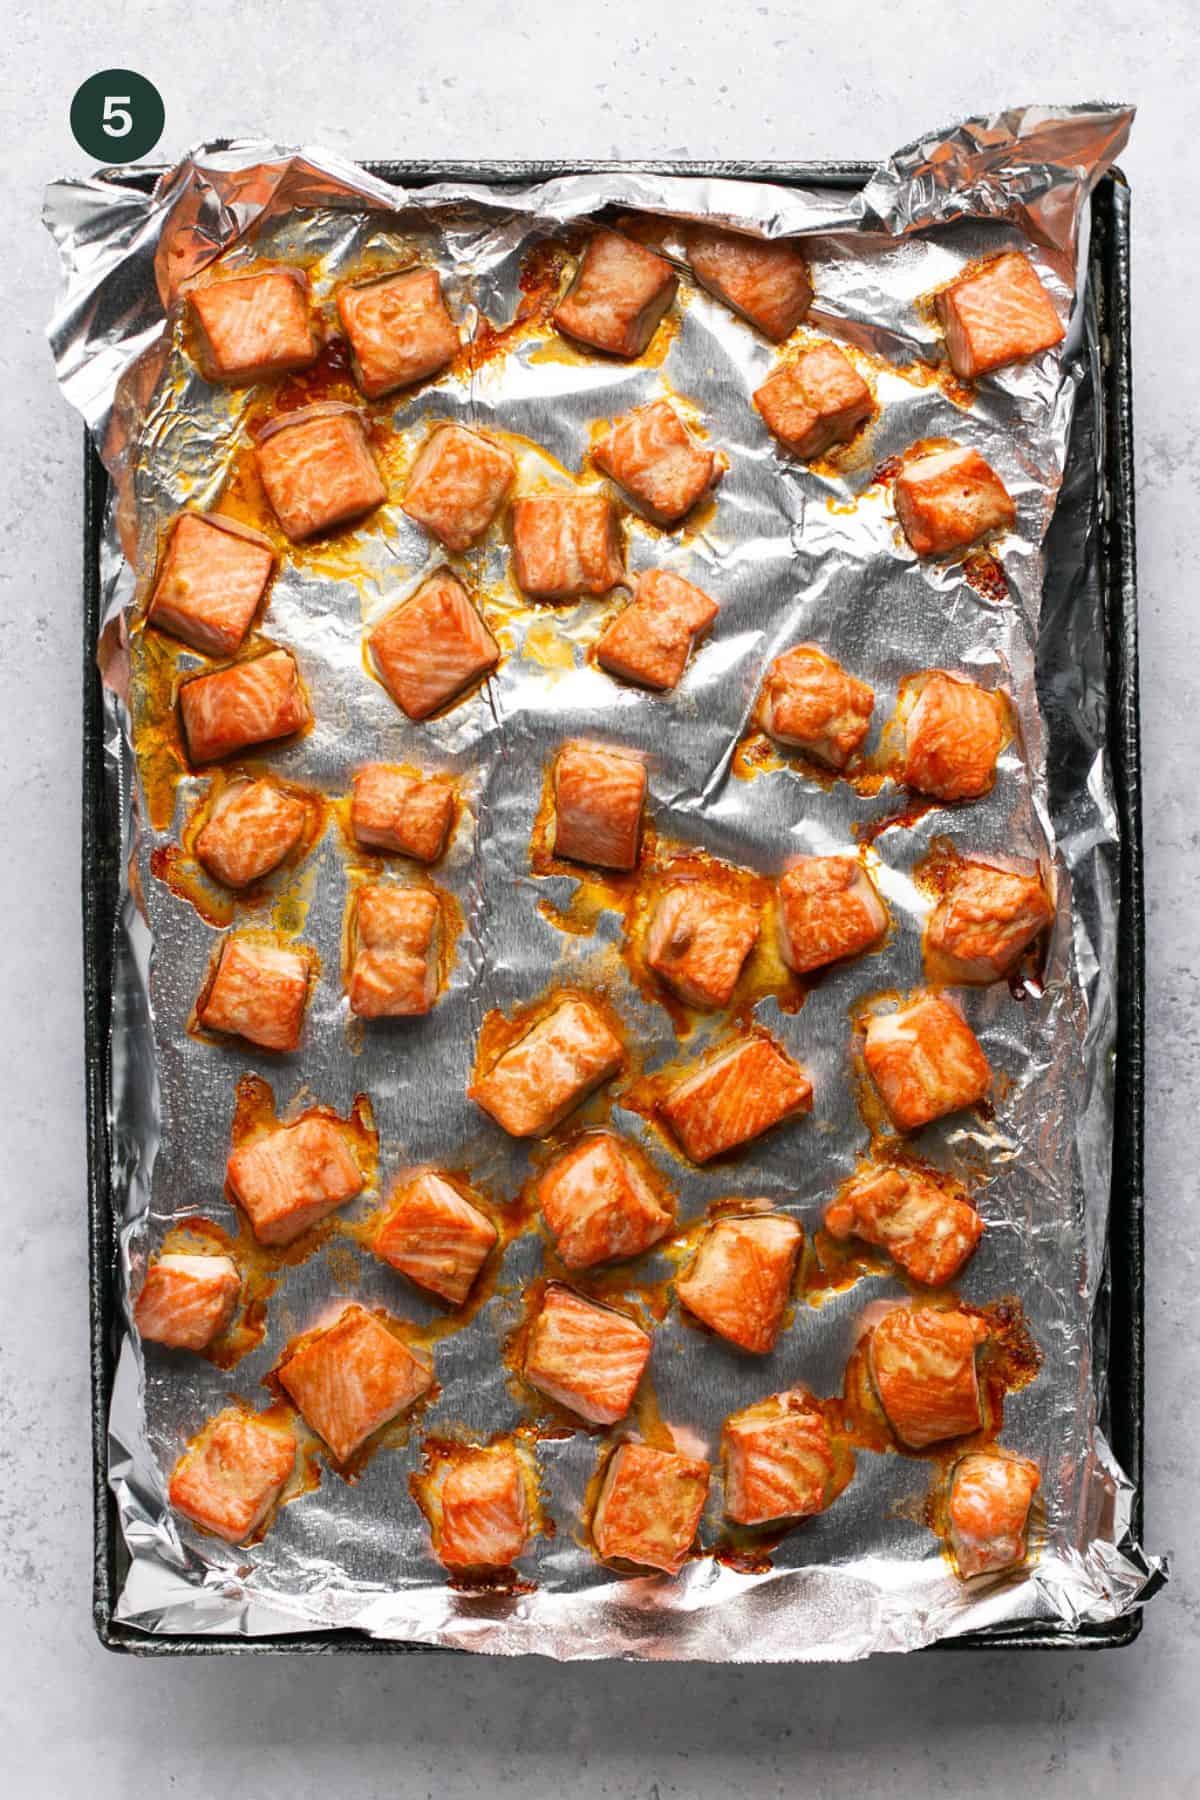 Baked cubed salmon on foil lined baking sheet. 